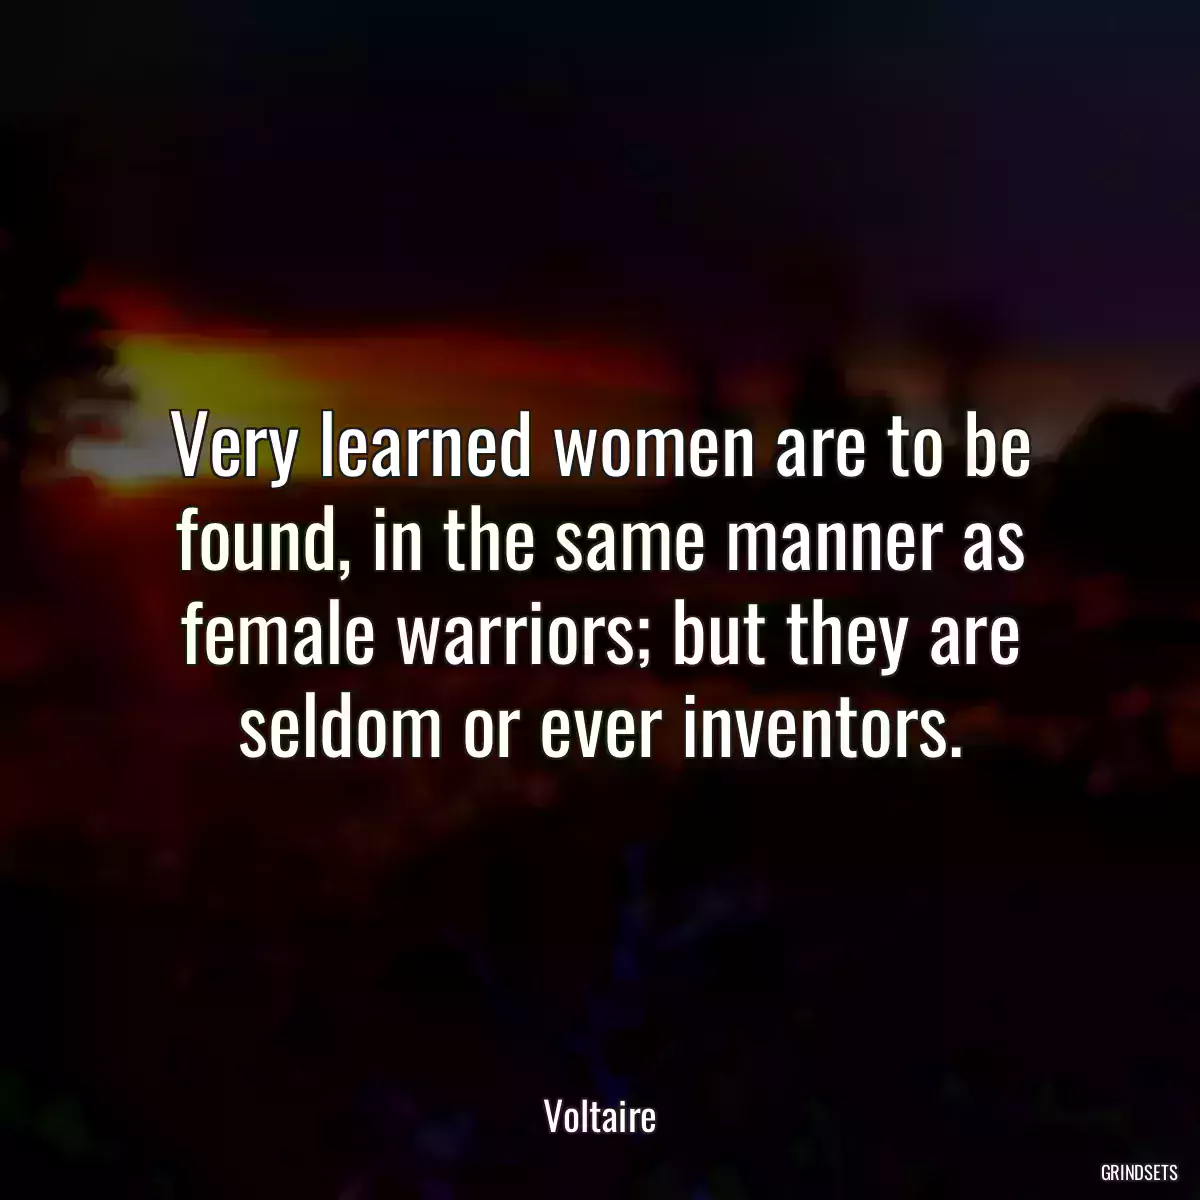 Very learned women are to be found, in the same manner as female warriors; but they are seldom or ever inventors.